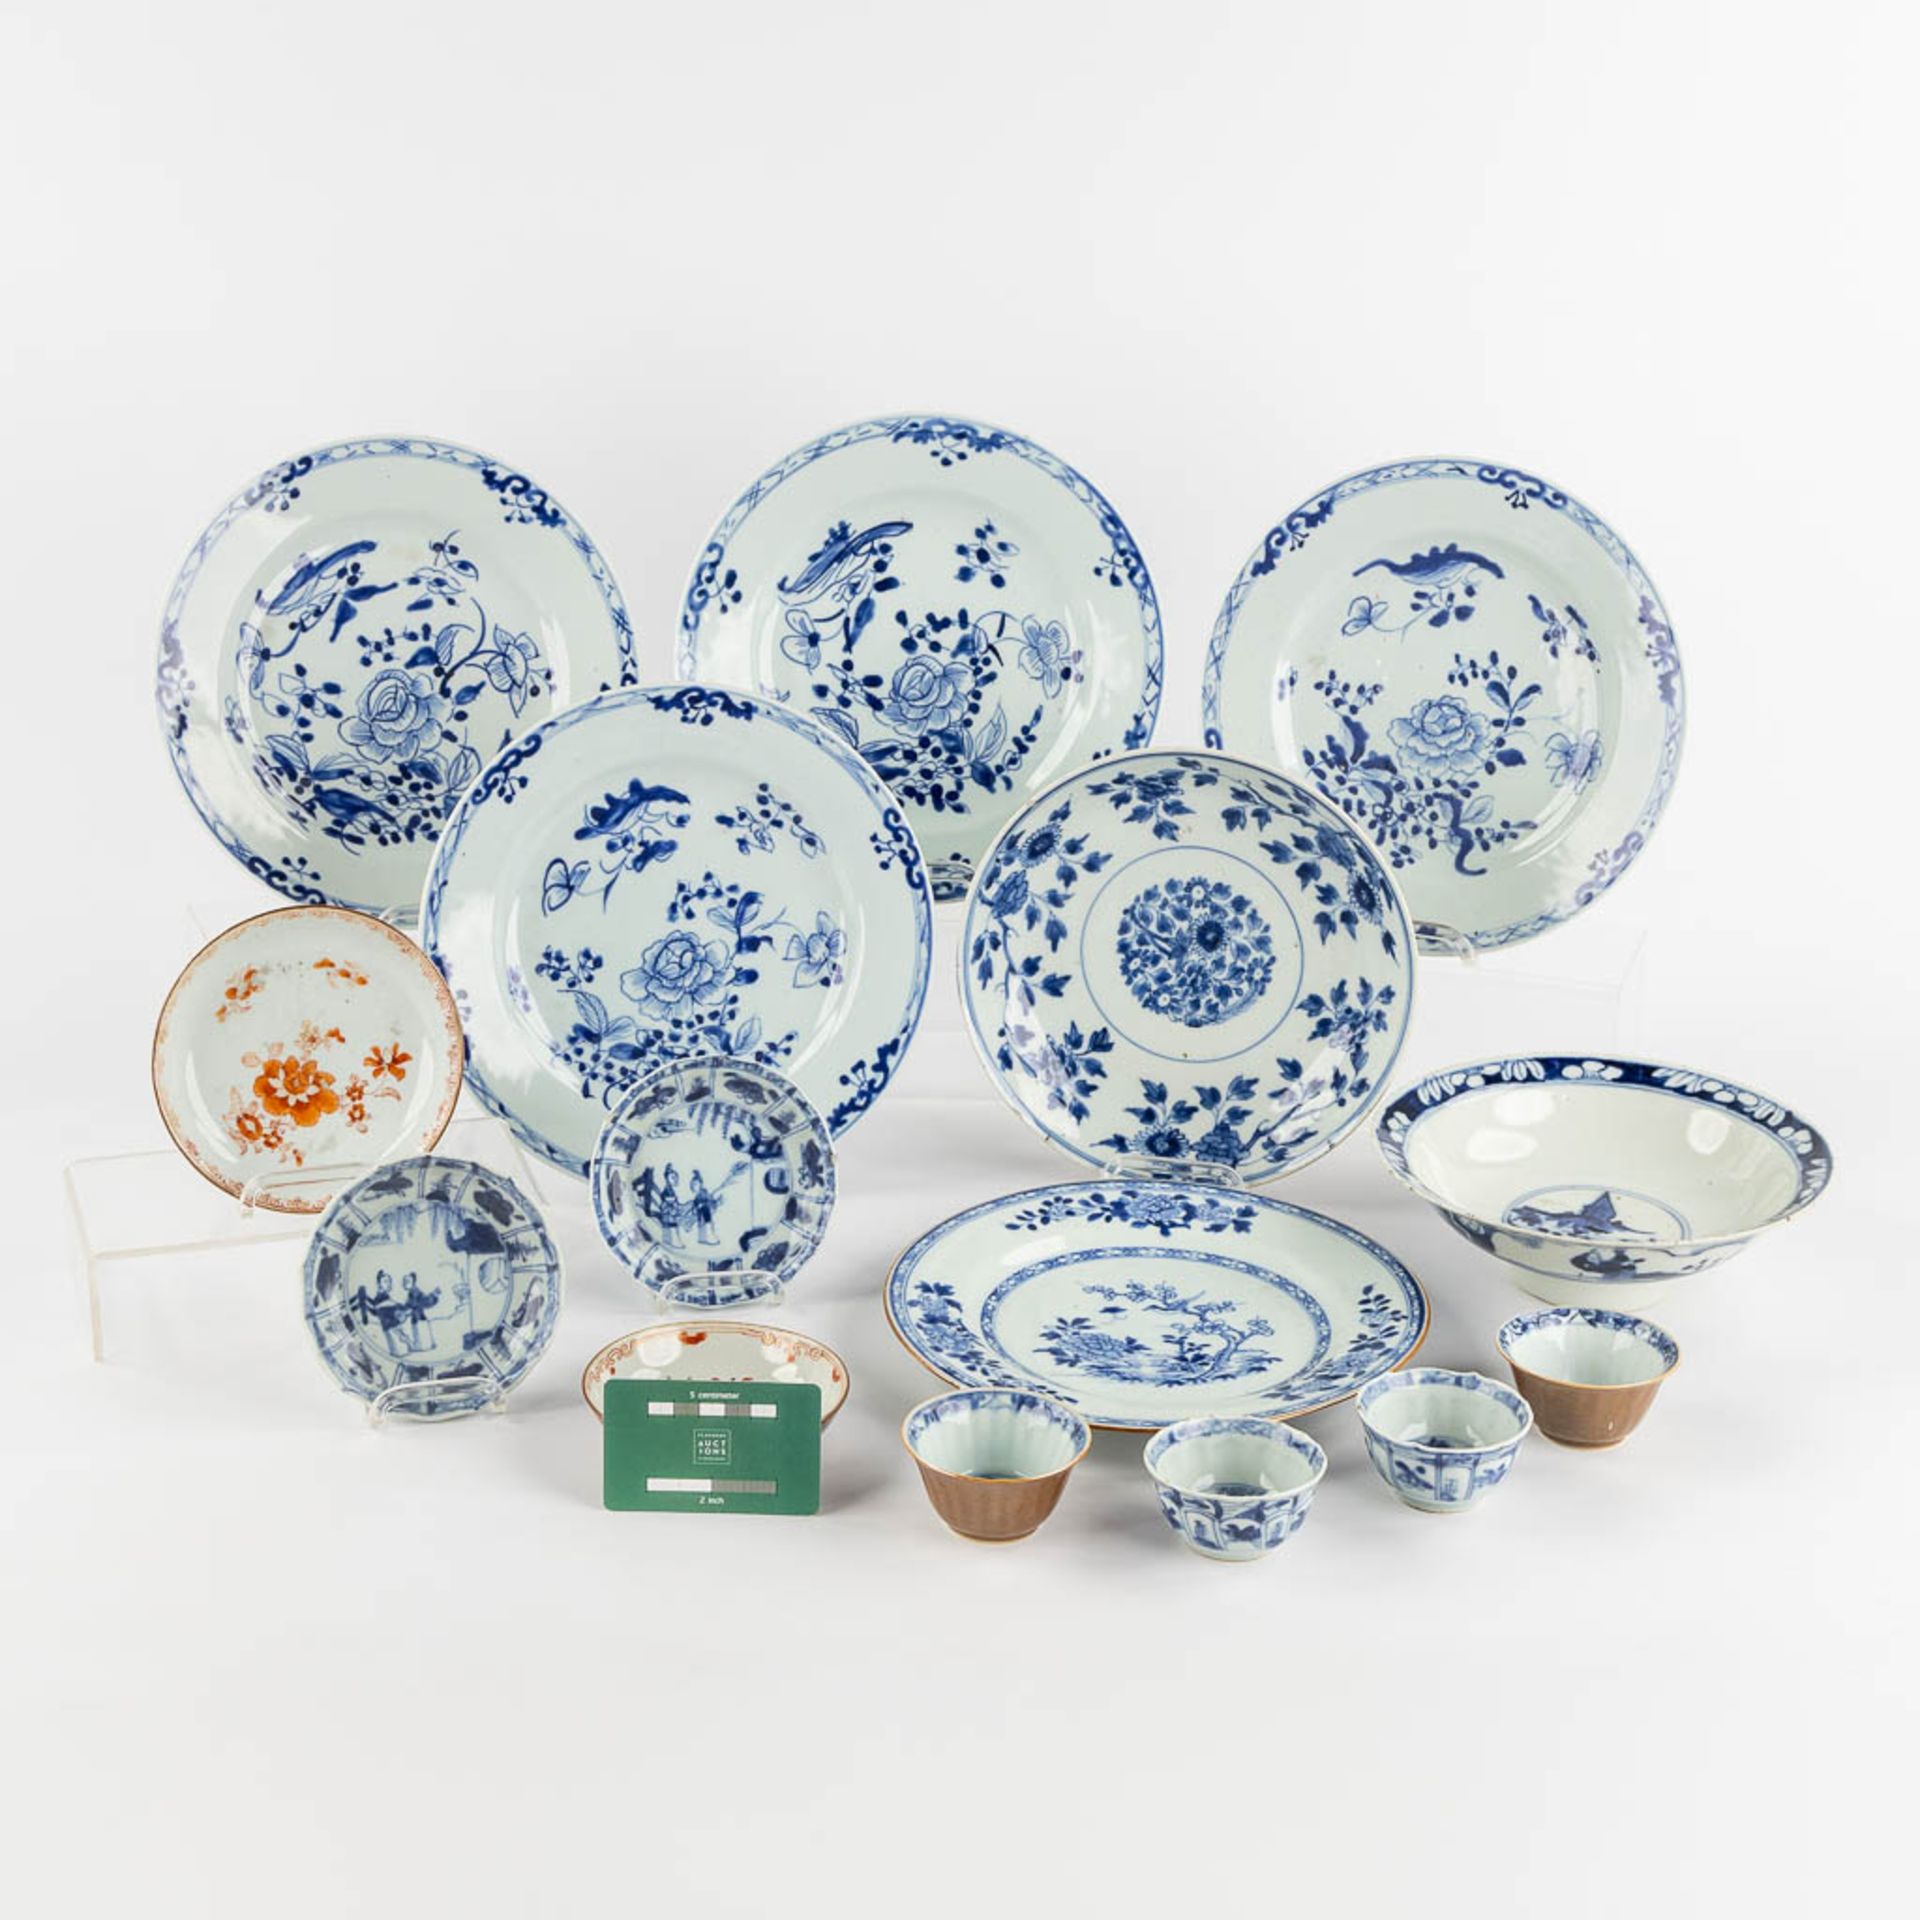 Fifteen Chinese cups, saucers and plates, blue white and Famille Roze. (D:23,4 cm) - Image 2 of 15